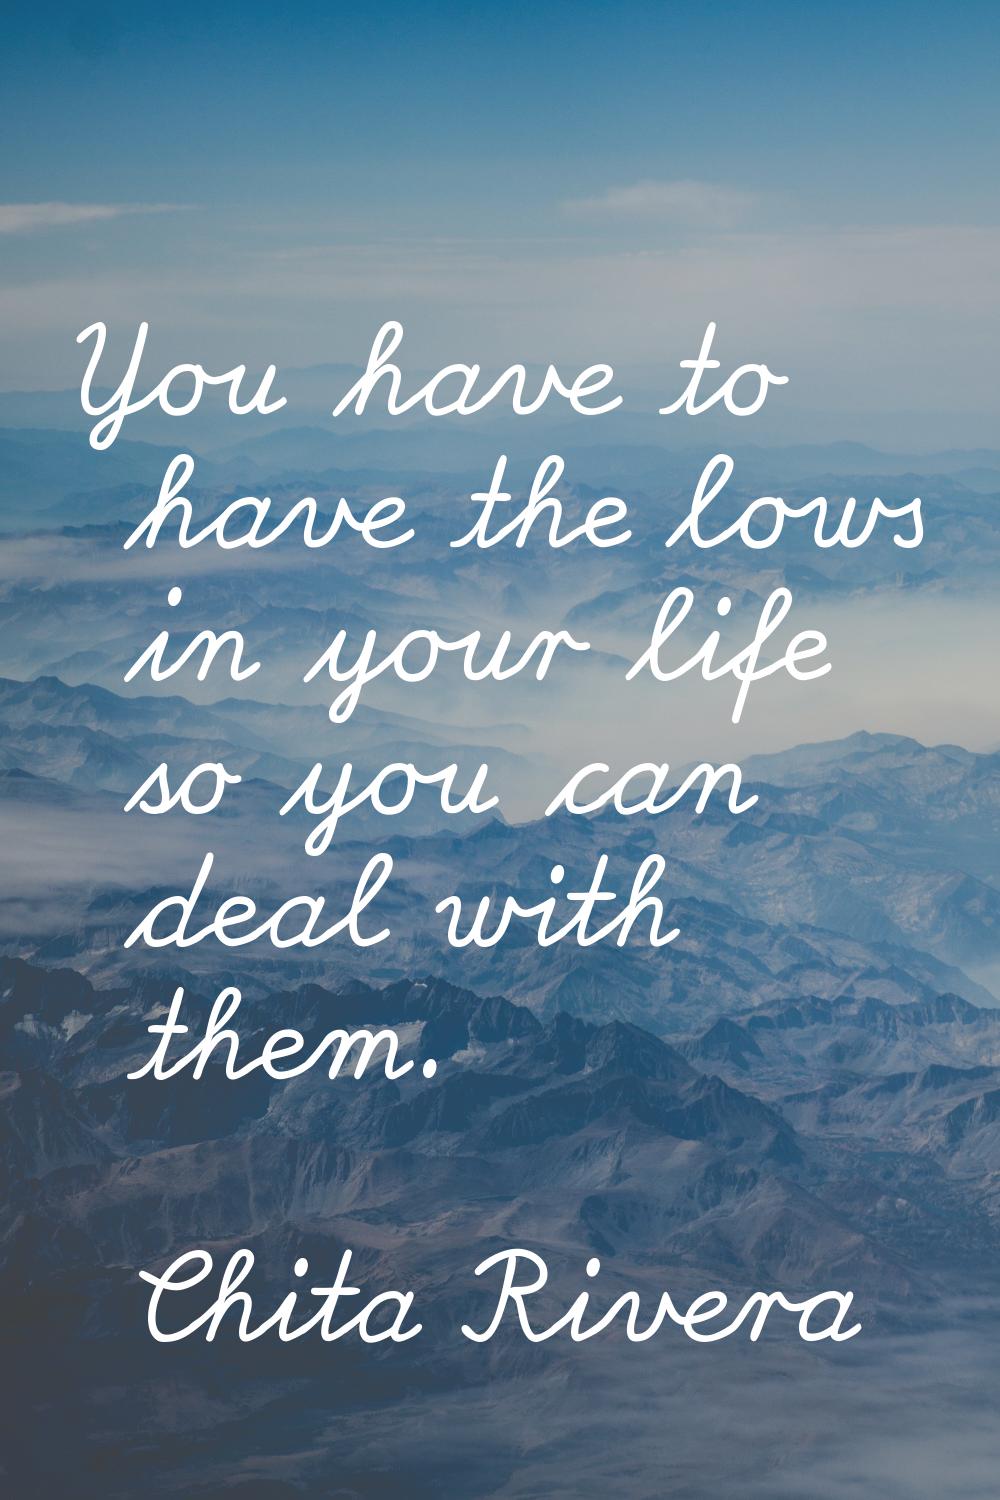 You have to have the lows in your life so you can deal with them.